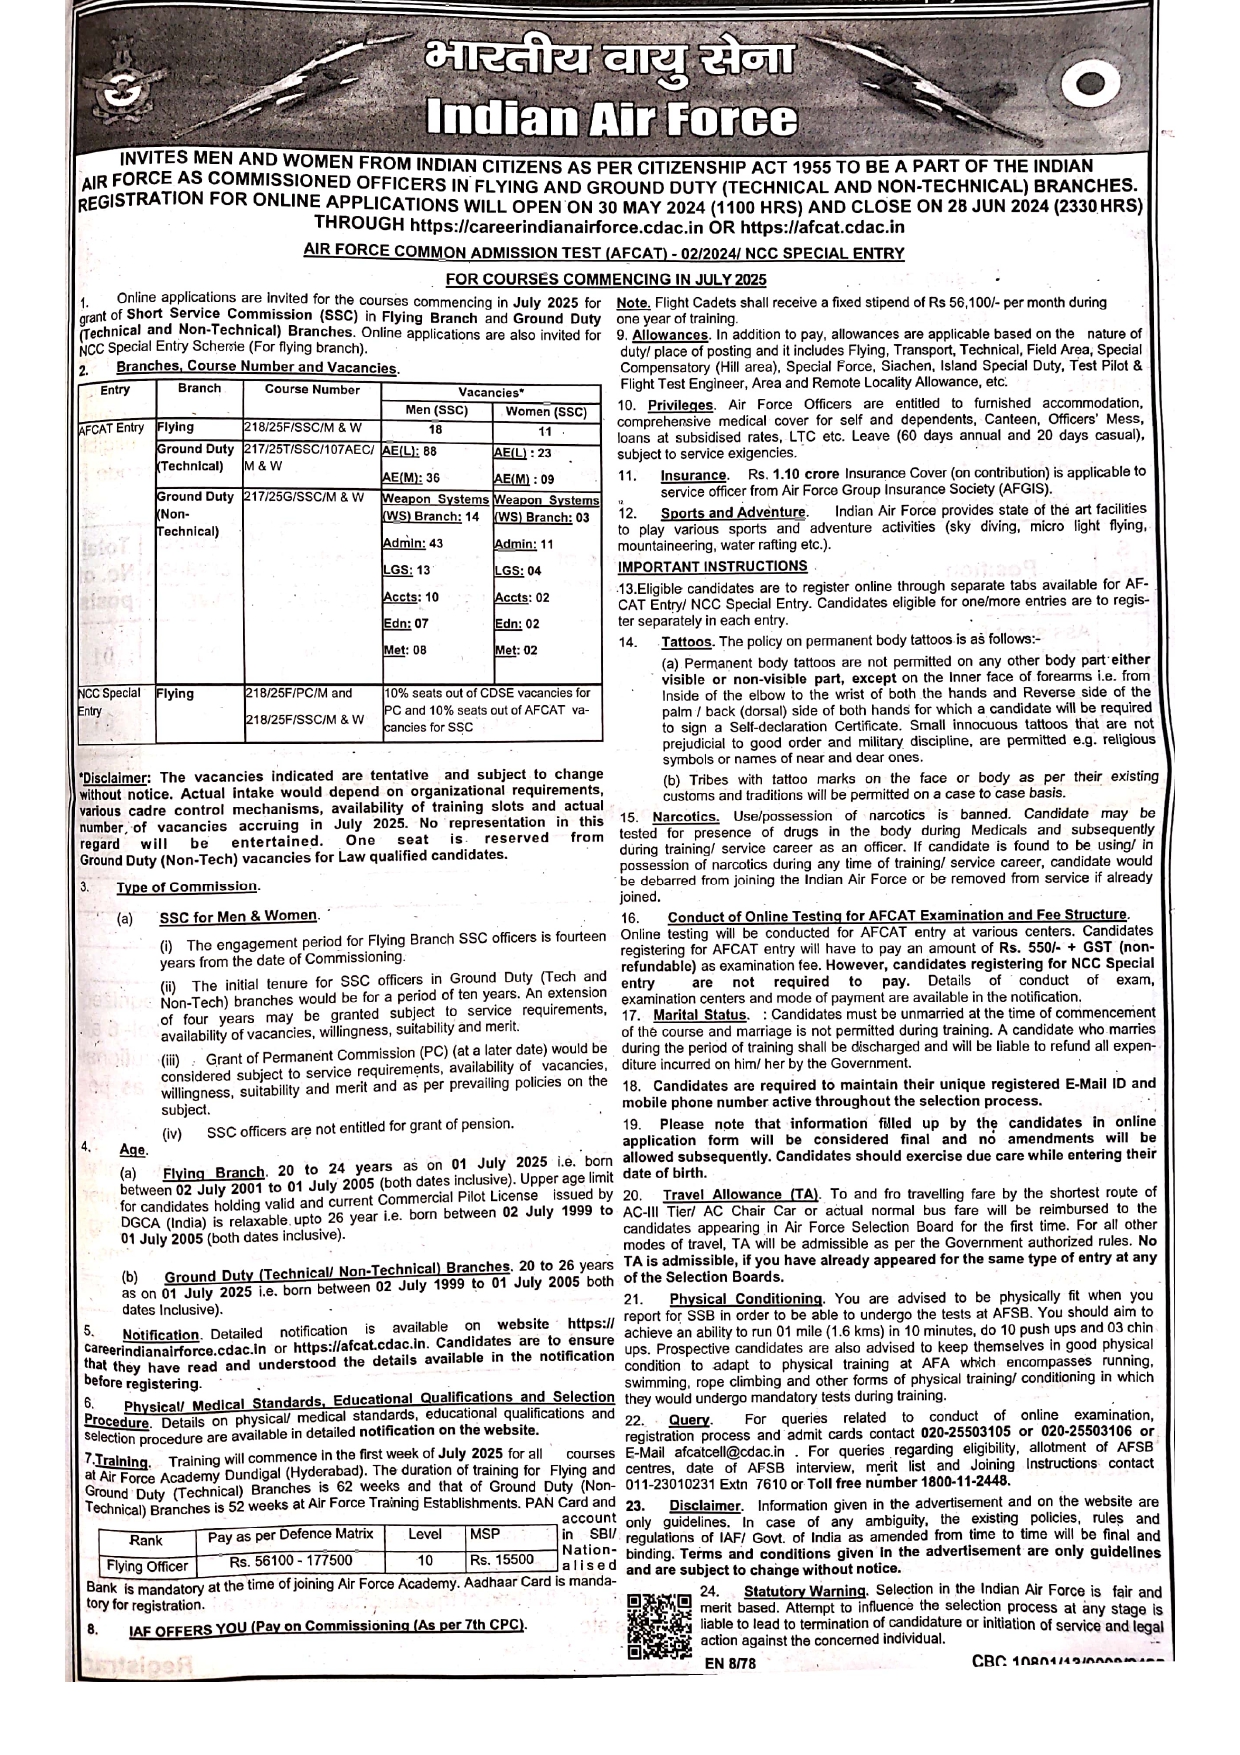 Indian-Air-Force-Recruitment-2024-Apply-for-304-Commissioned-Officer-Posts-Notification.jpg